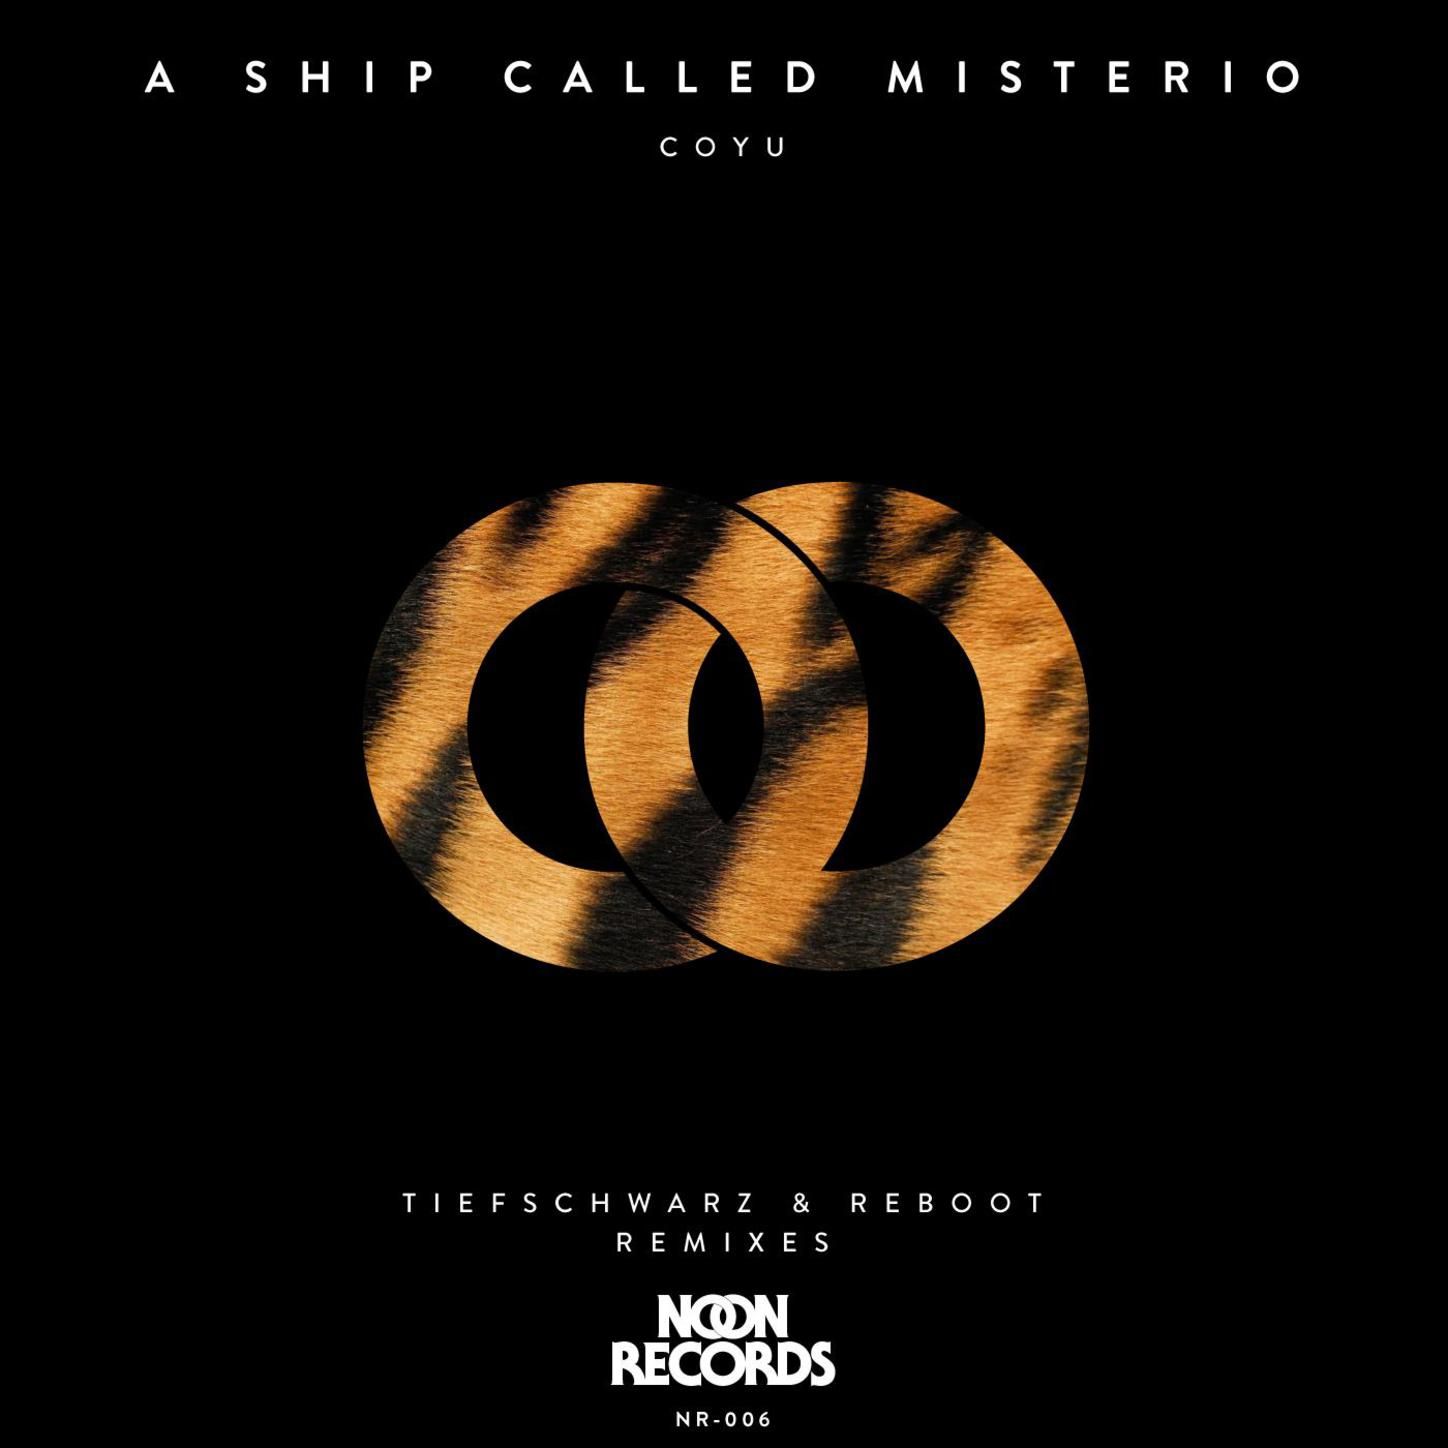 A Ship Called Misterio (Reboot Remix)